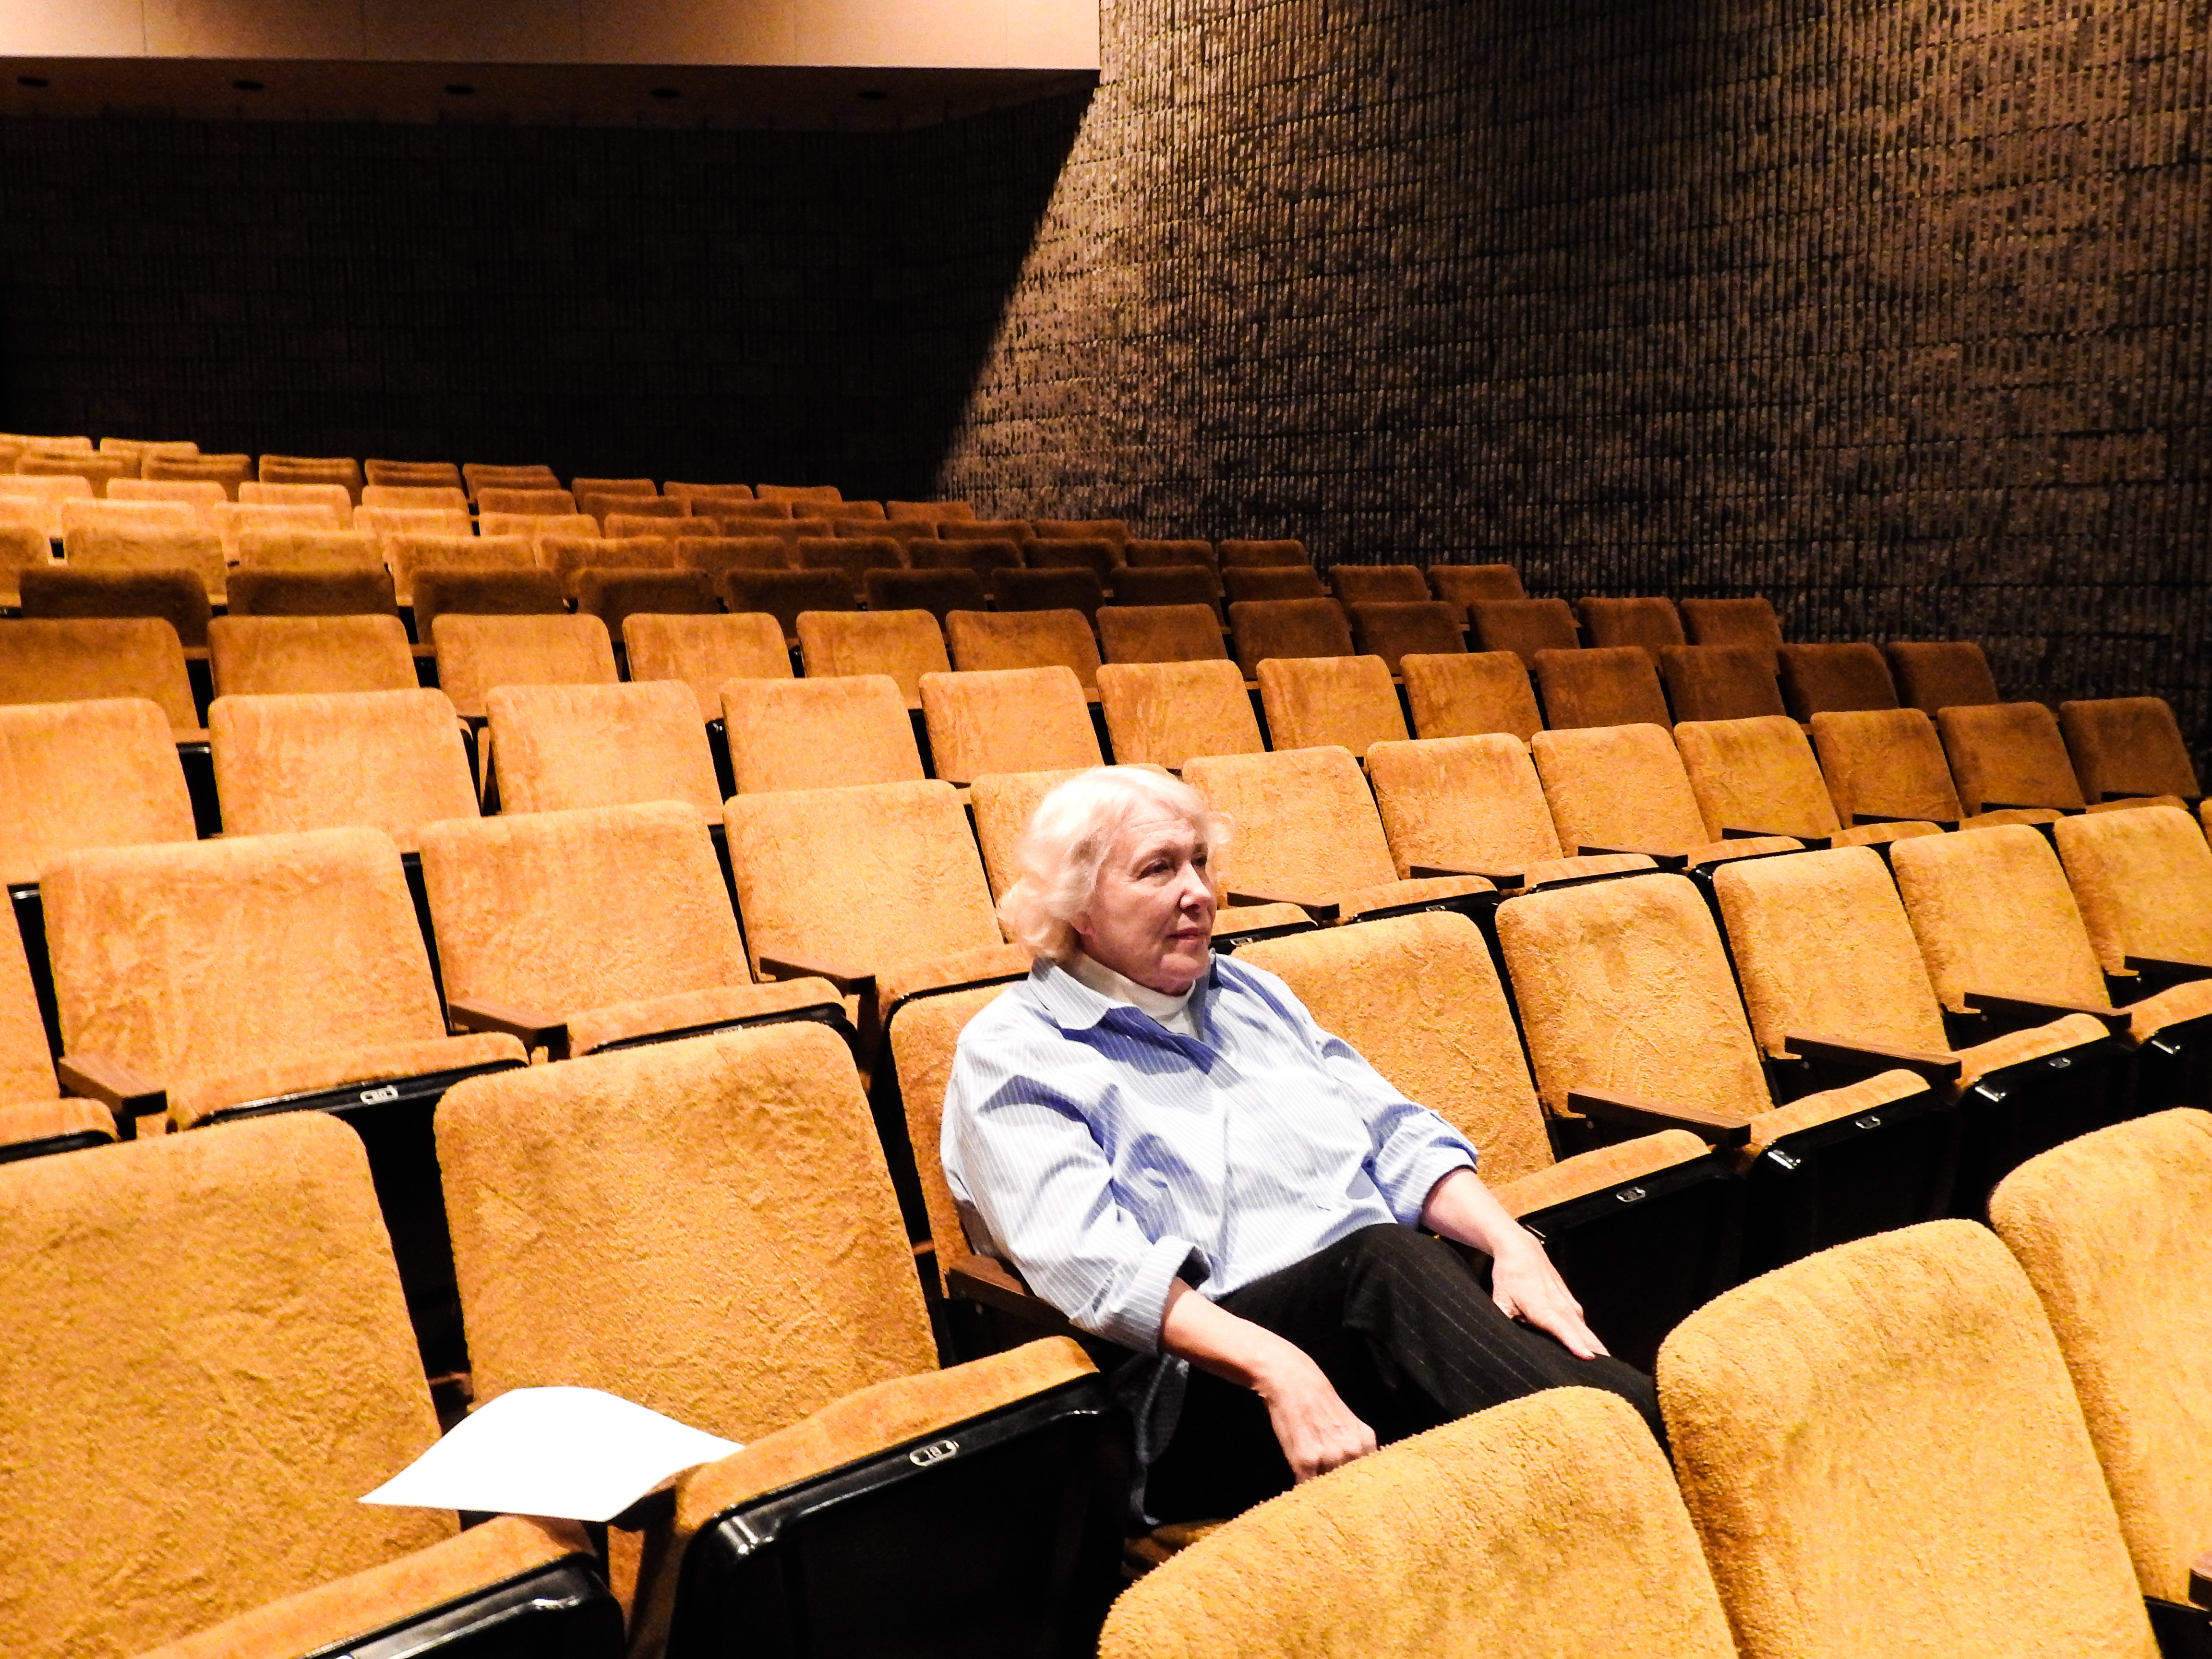 Director Mary Bremer-Beer directing a play in the Adray Auditorium, Henry Ford College, Dearborn, Michigan